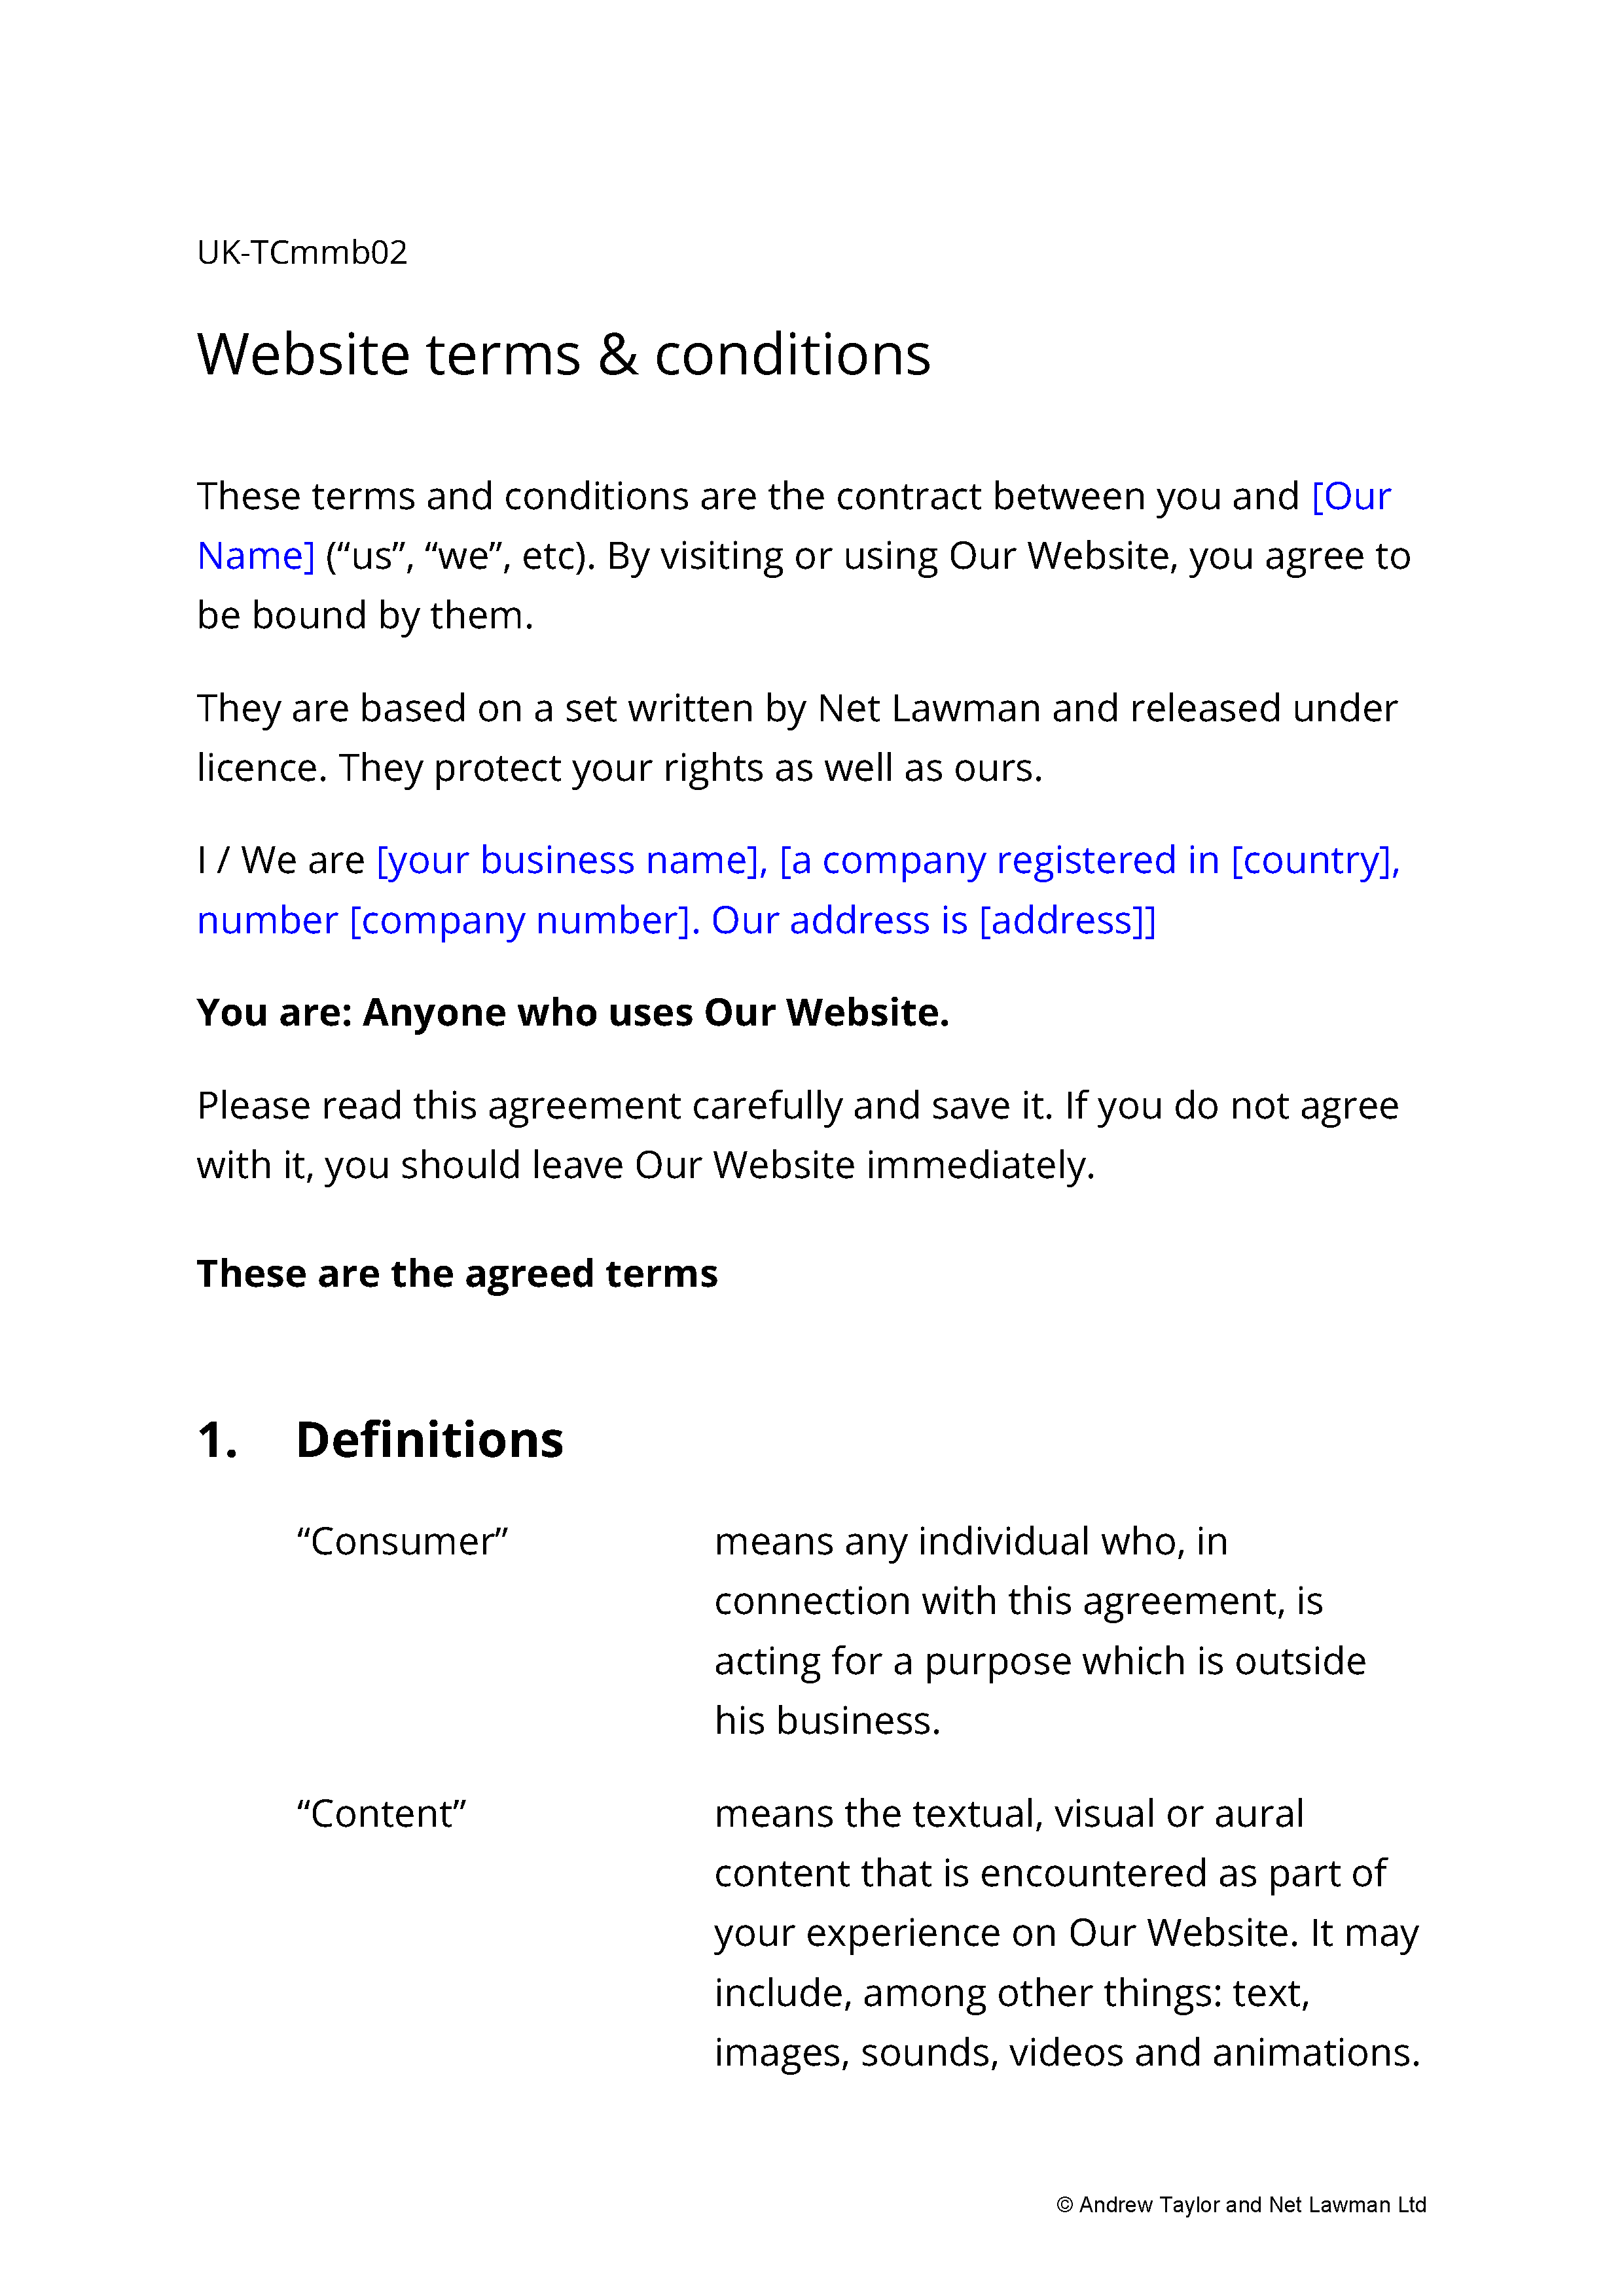 Sample page from the terms for a member services website